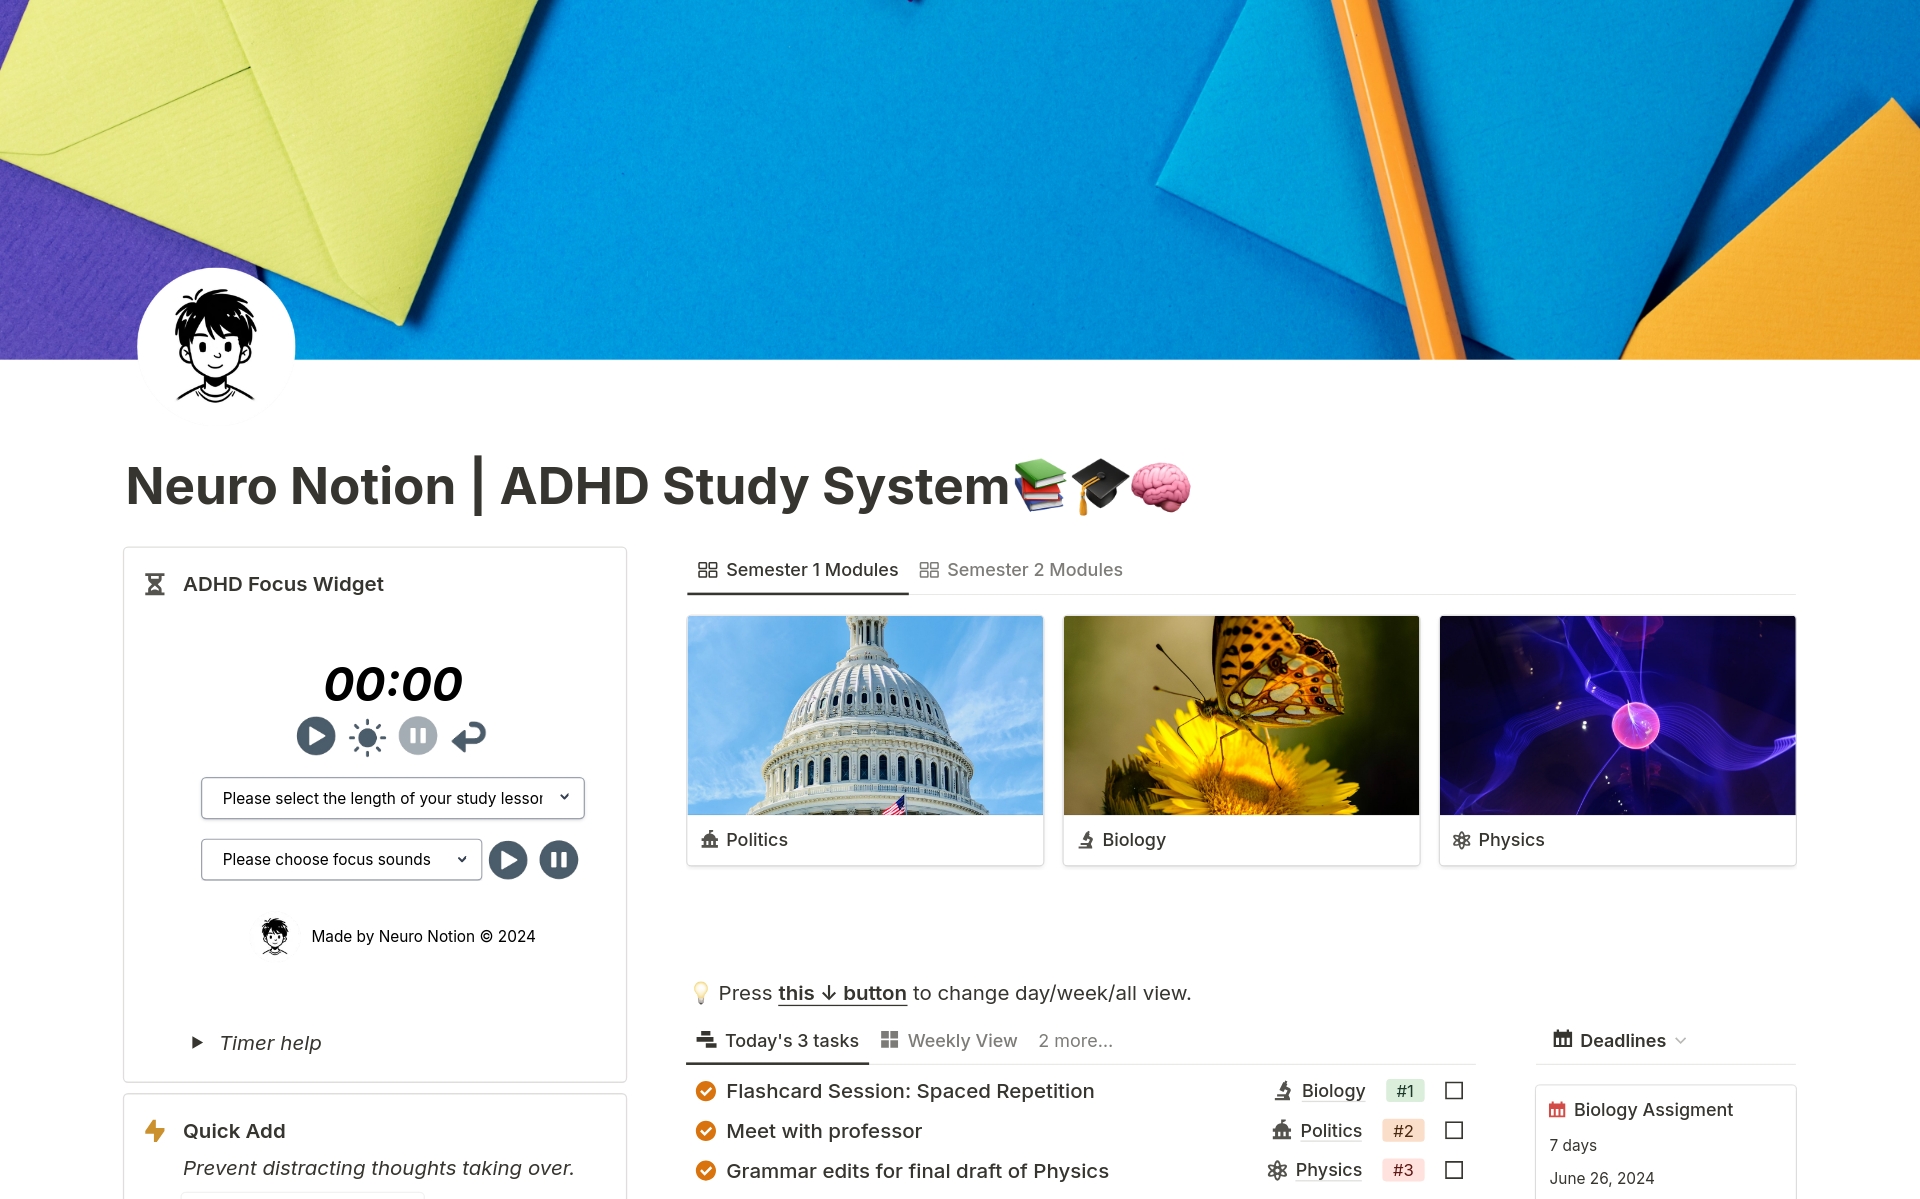 Neuro Notion is the only productivity system scientifically designed around the ADHD brain. It lets students with ADHD stay laser-focused, for longer, without distractions.